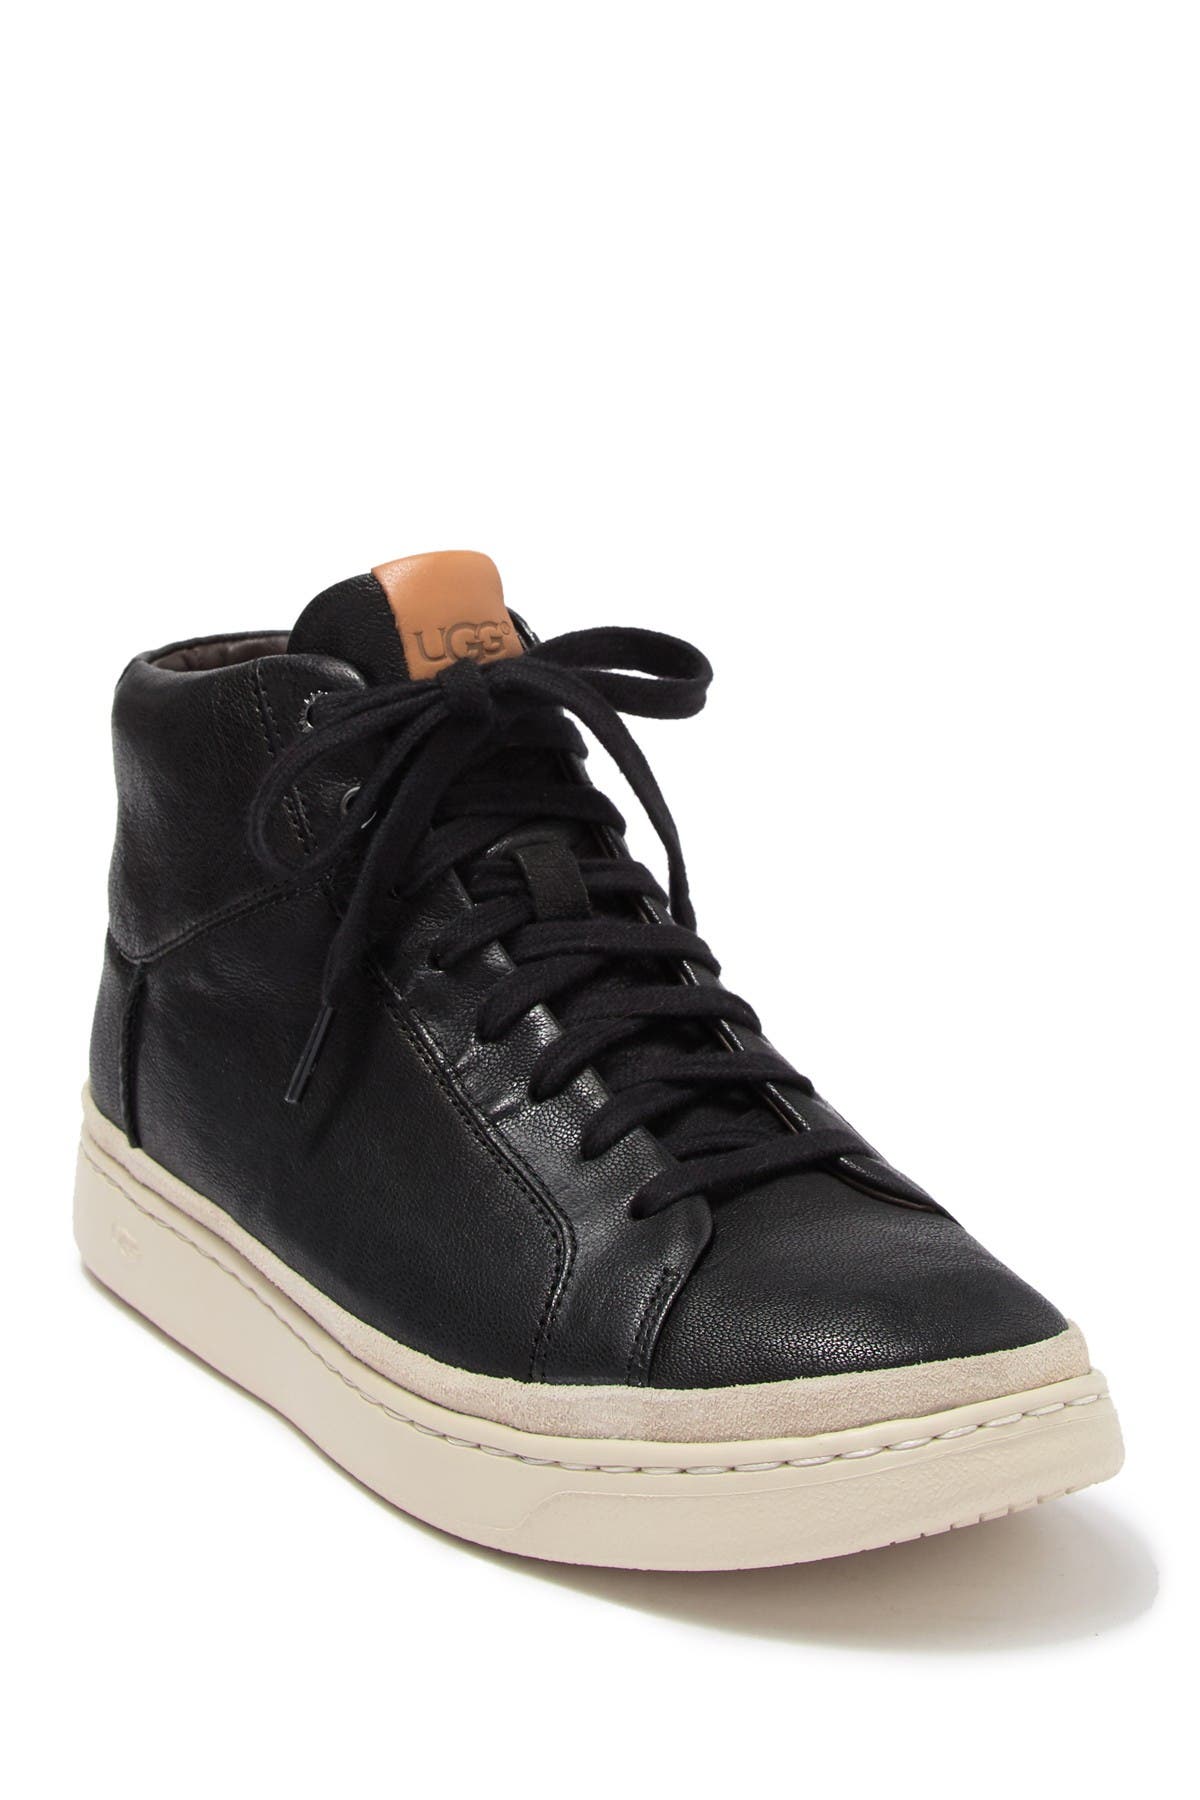 ugg leather high top sneakers